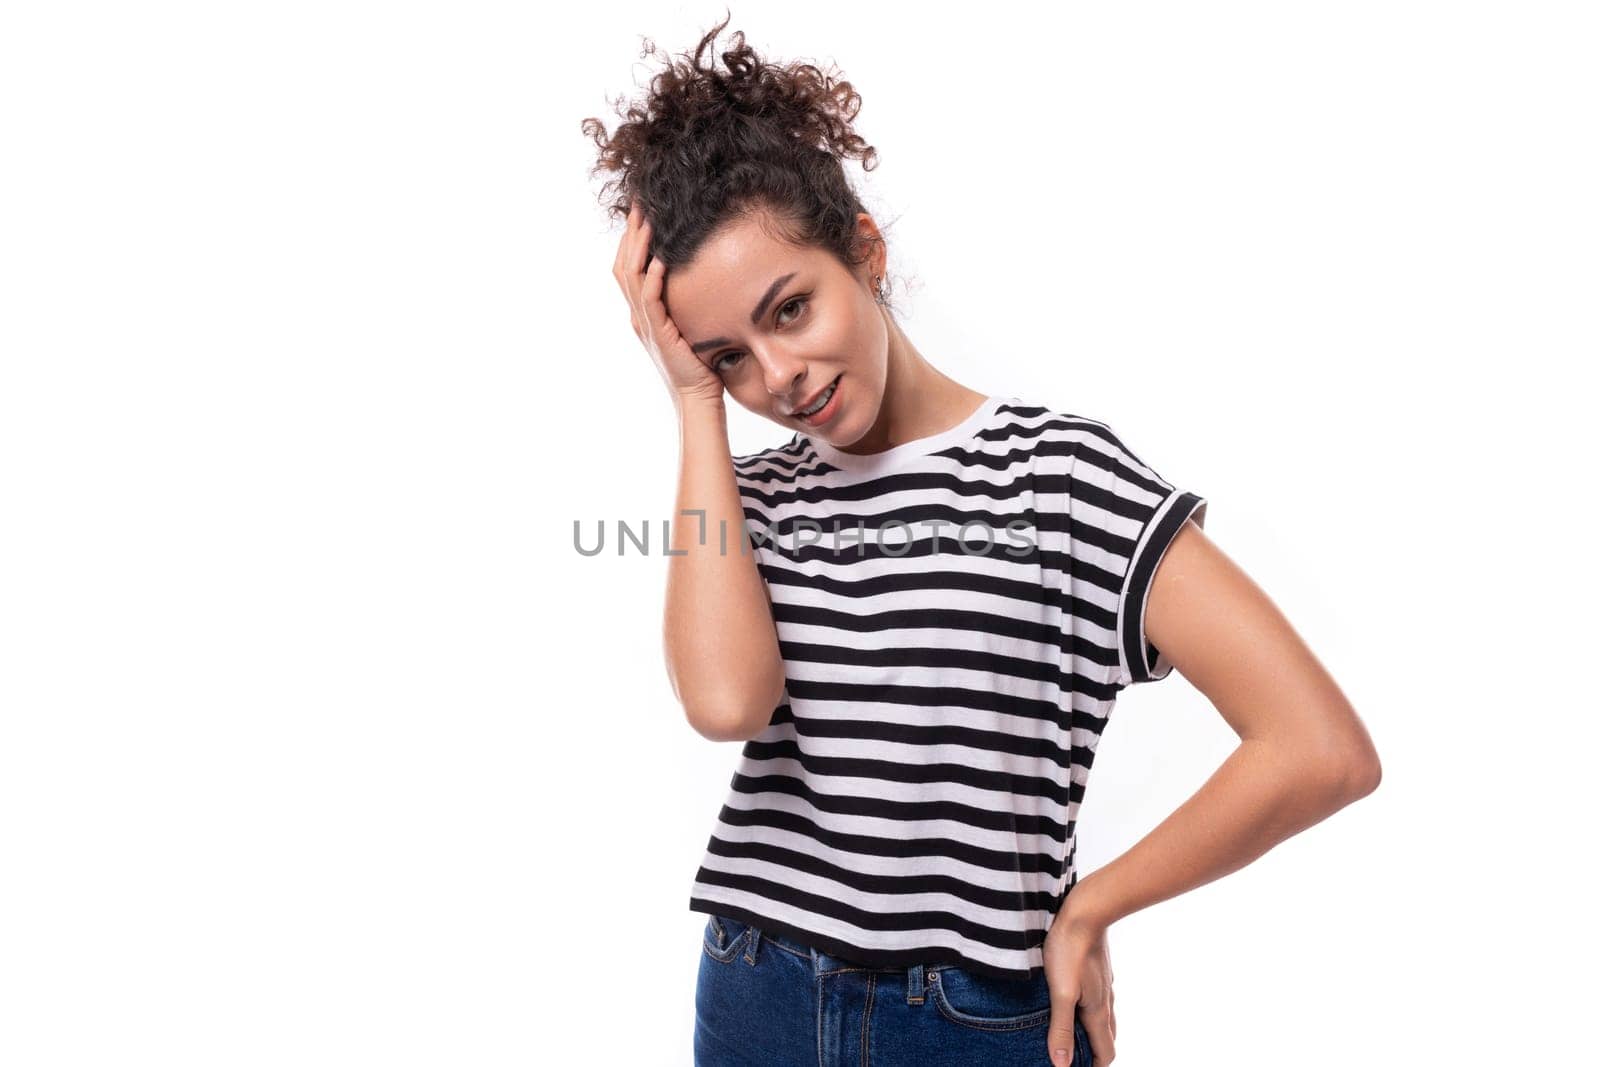 young caucasian woman with curly hair dressed in a striped summer t-shirt is brainstorming.